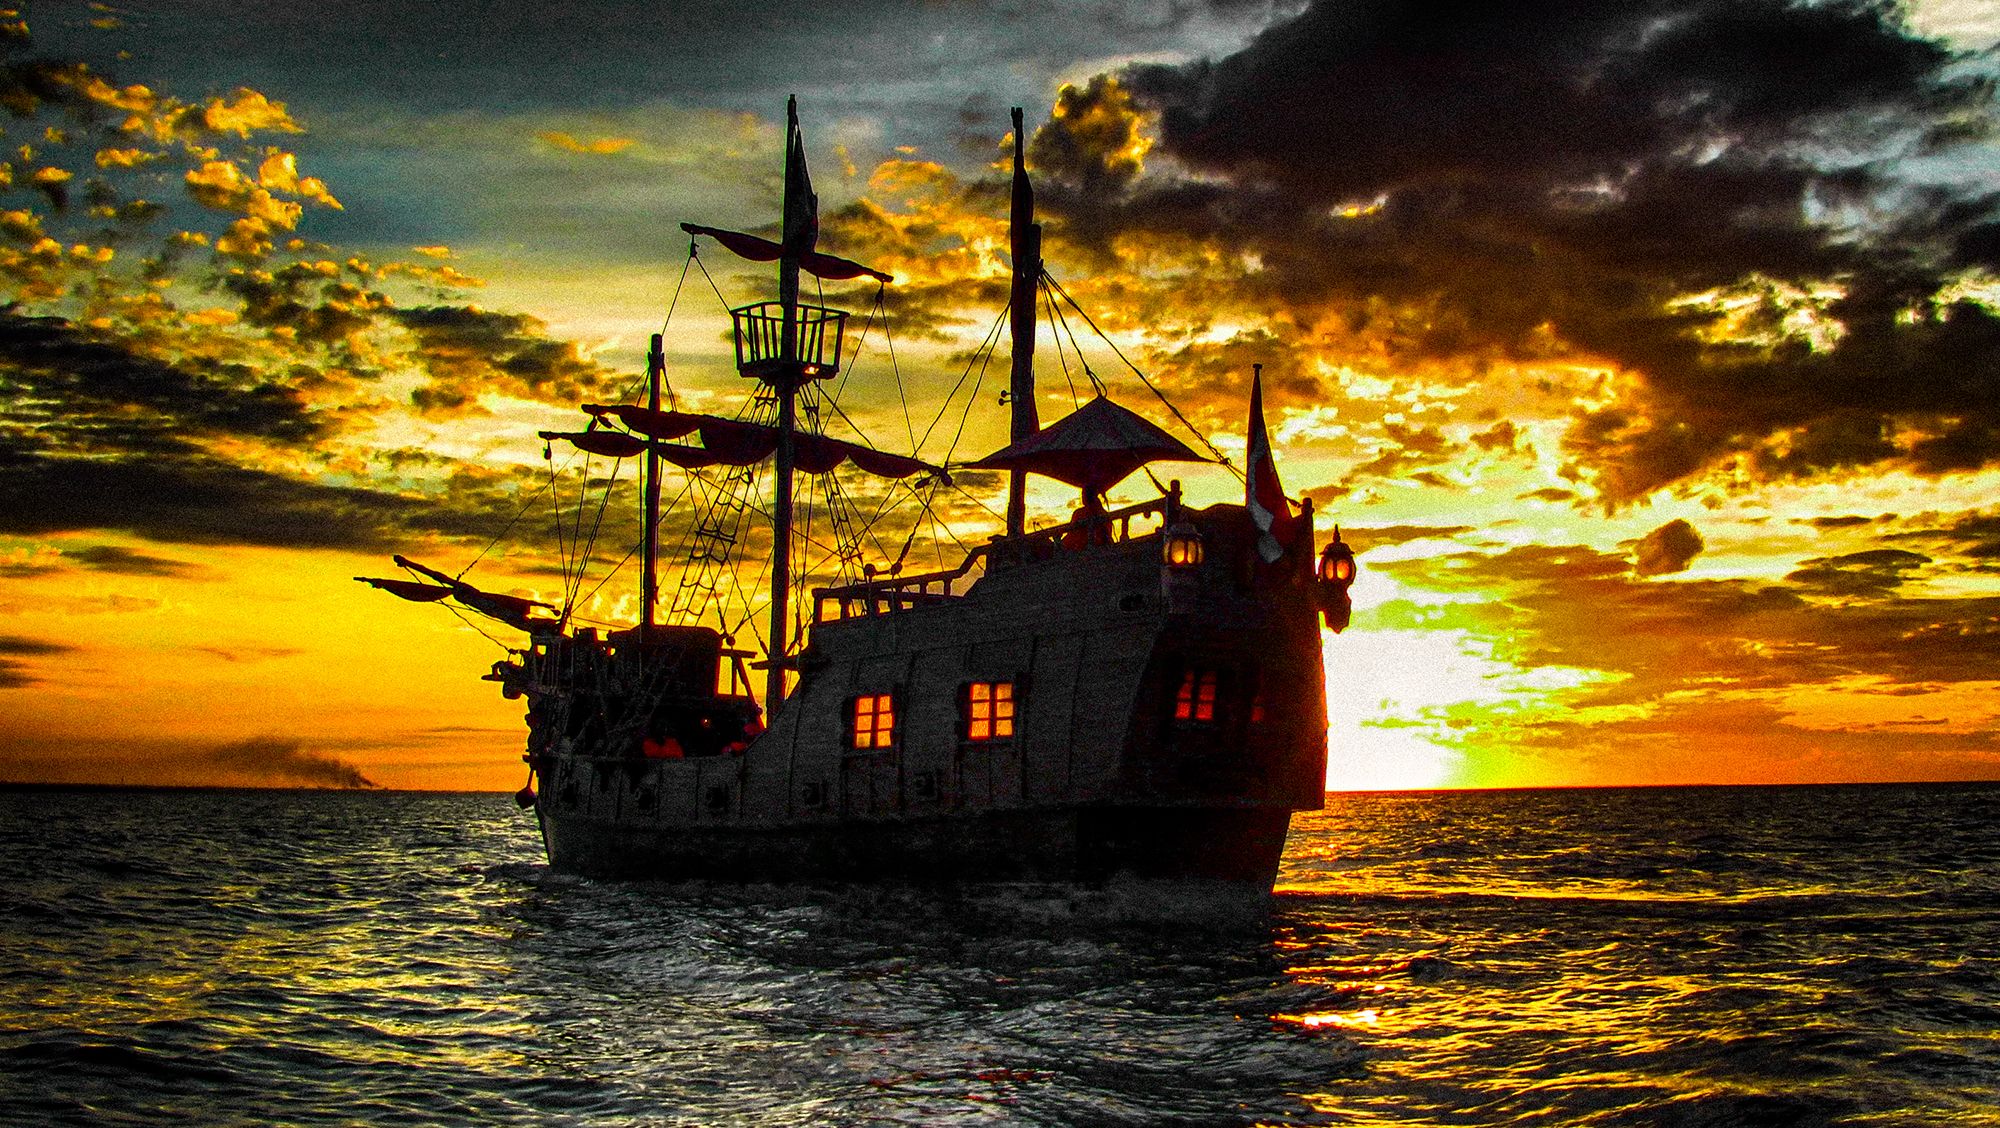 Pirates Of The Caribbean 3 Ships